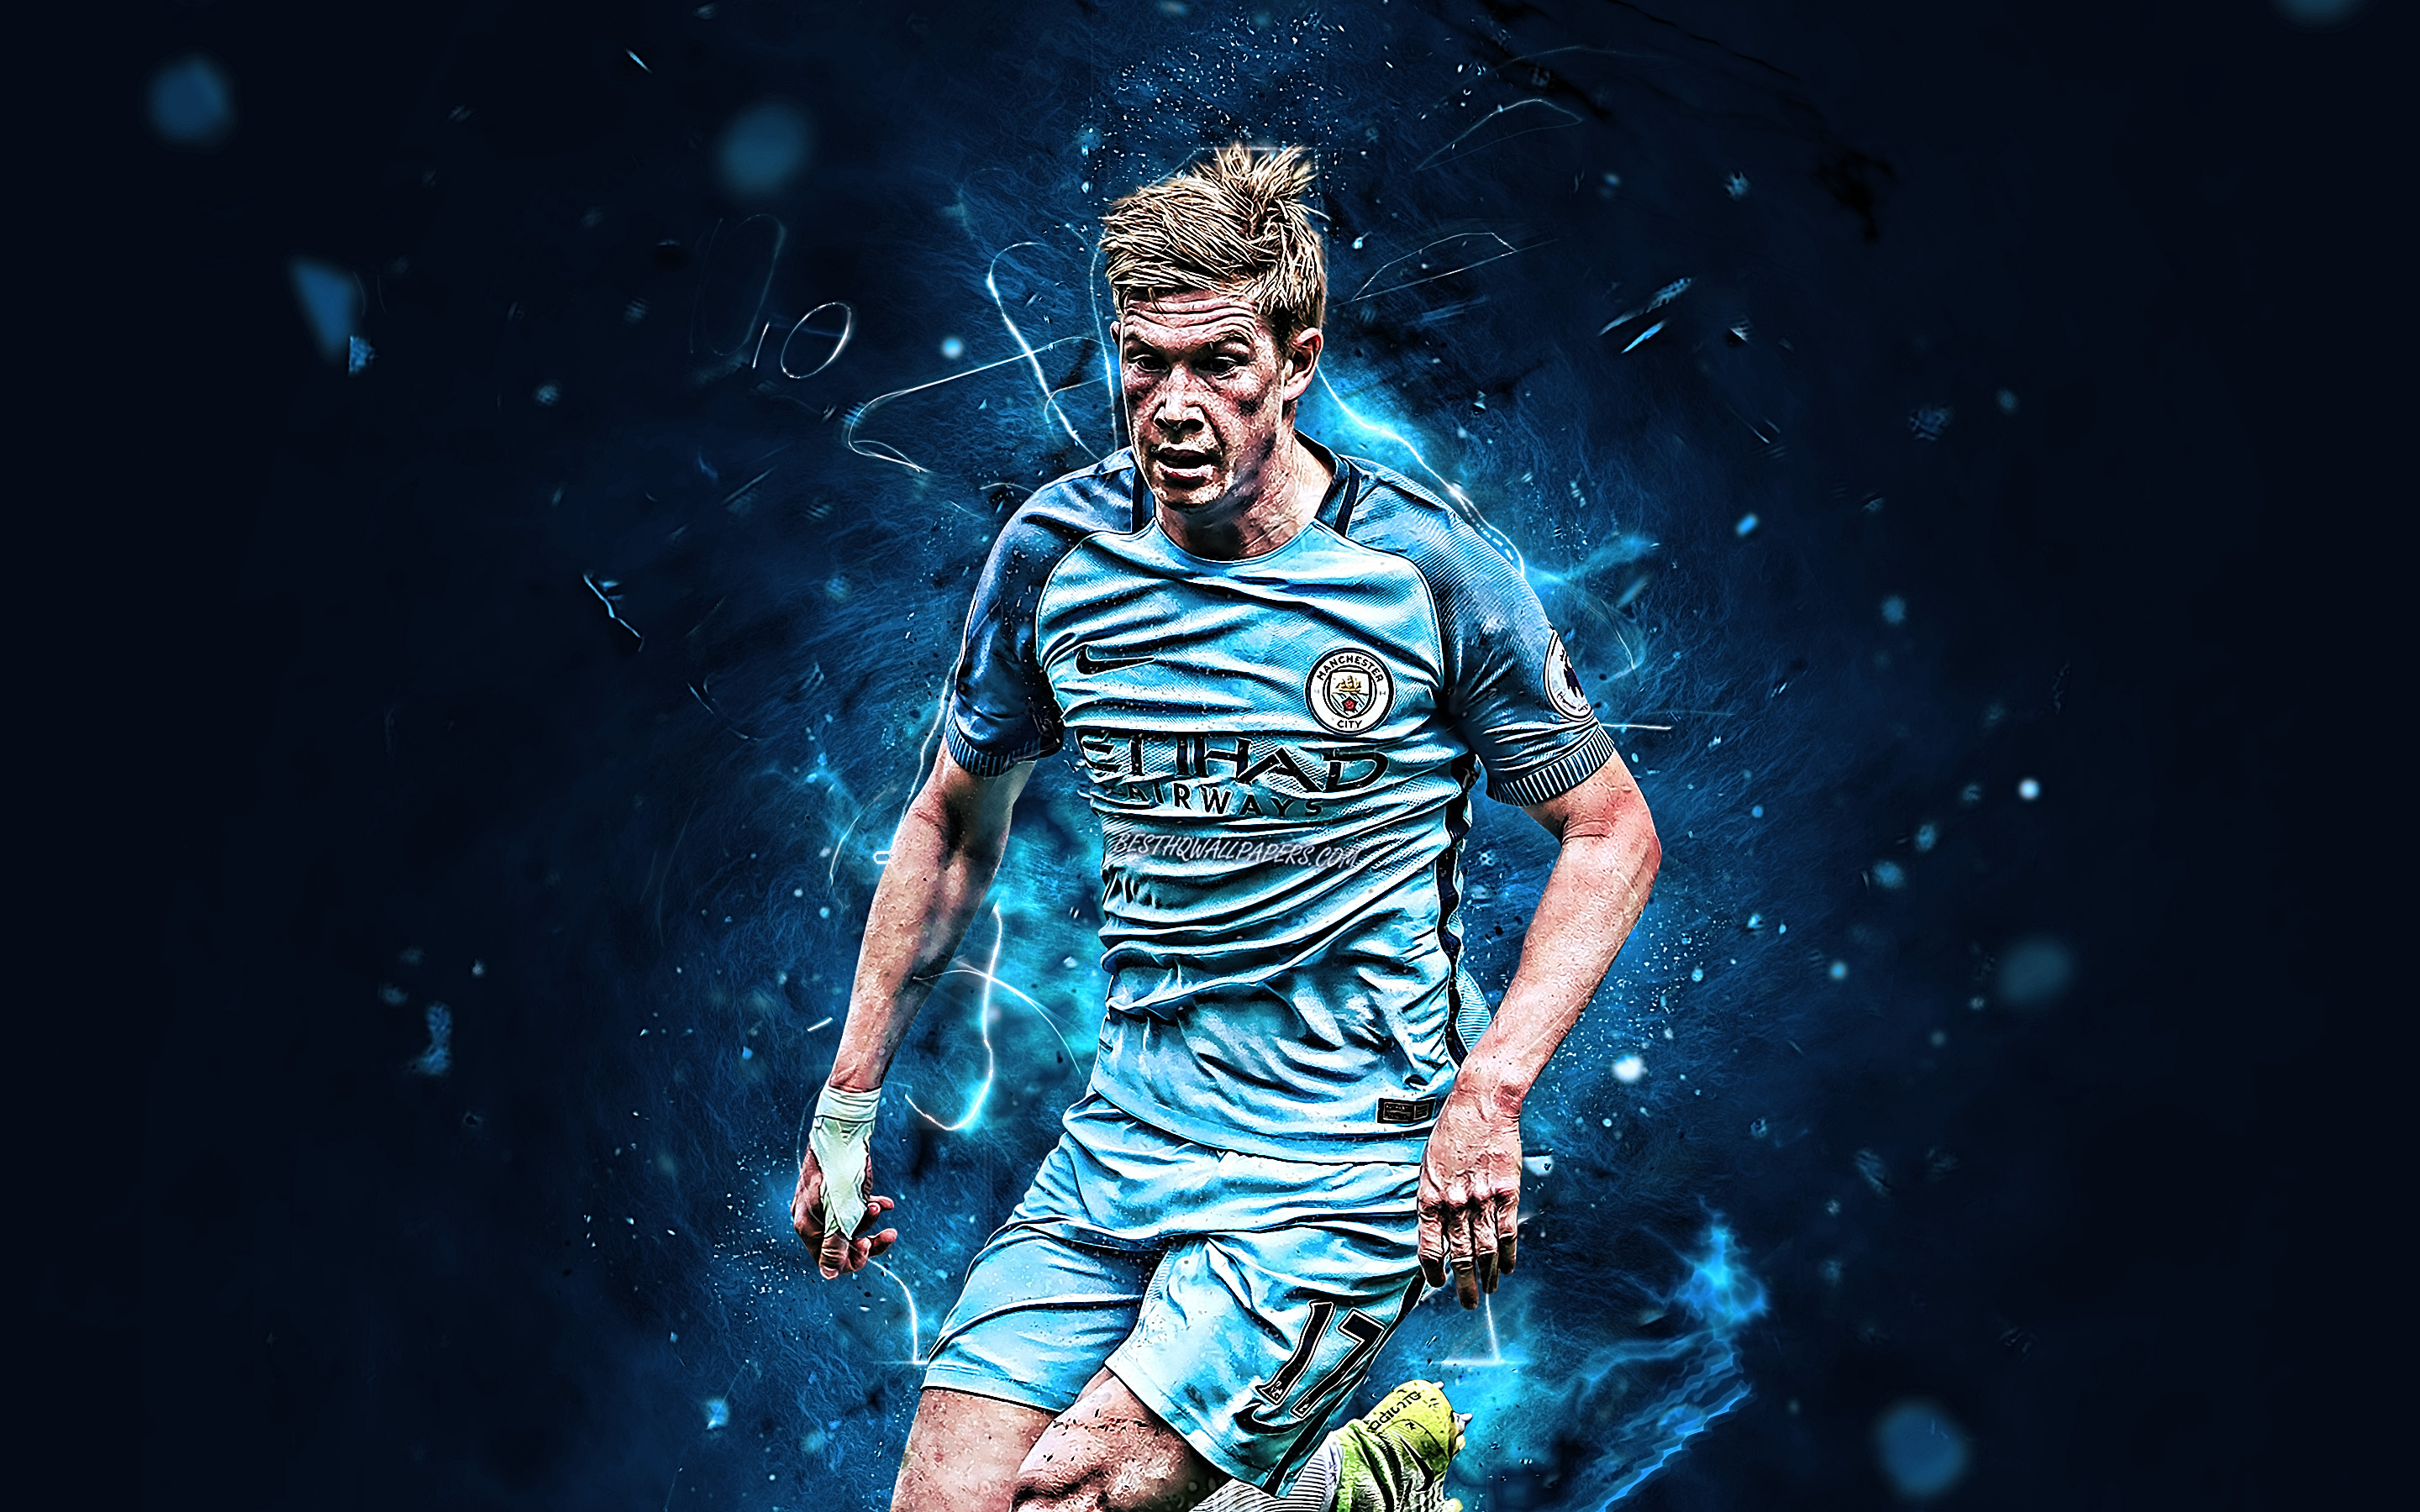 Download wallpaper Kevin De Bruyne, match, Manchester City FC, belgian footballers, soccer, De Bruyne, Premier League, Man City, football, neon lights, abstract art for desktop with resolution 2880x1800. High Quality HD picture